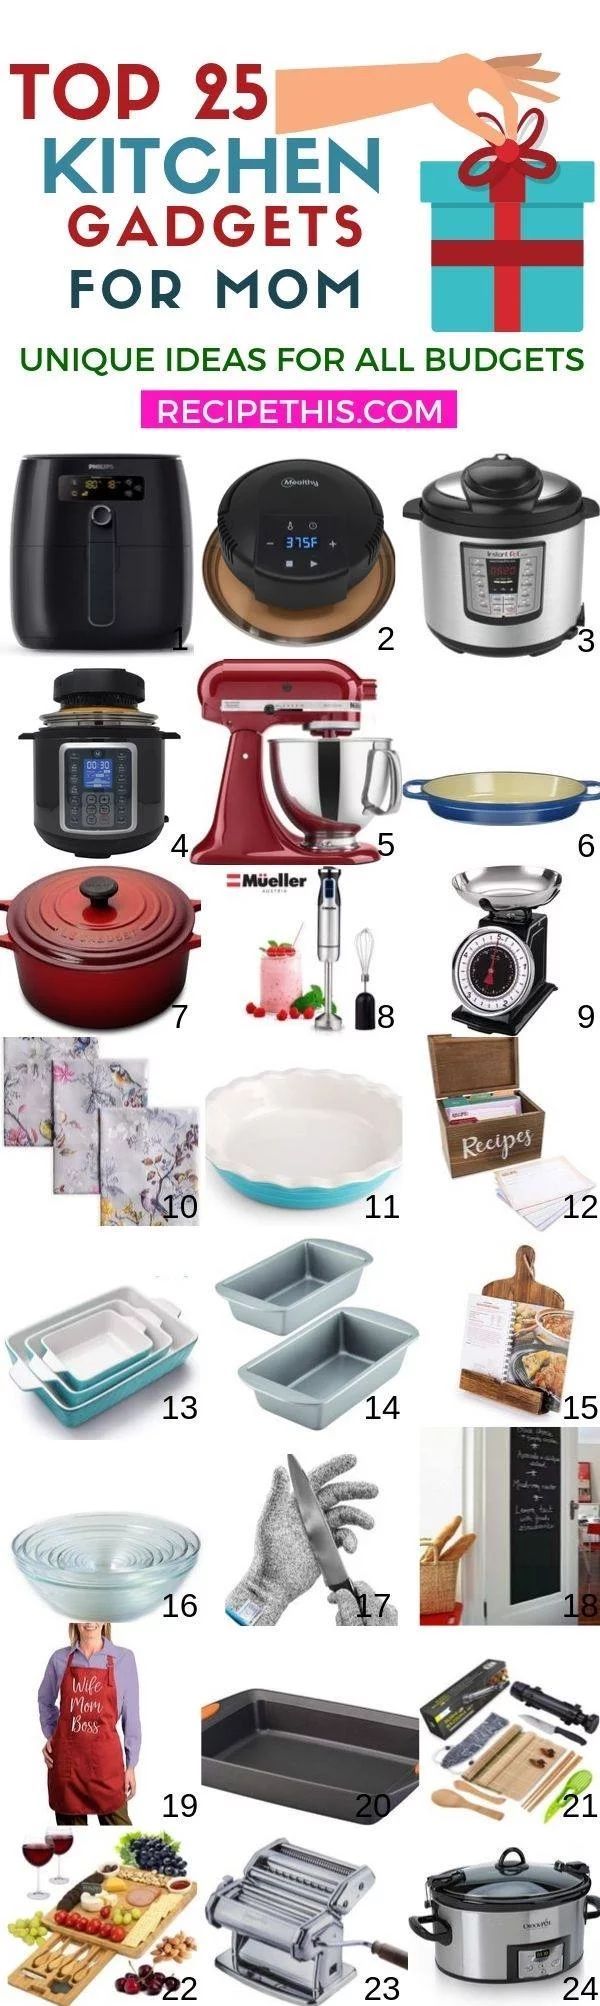 The Top 25 Best Ever Kitchen Gadgets for Mom. Featuring the ultimate kitchen gif...